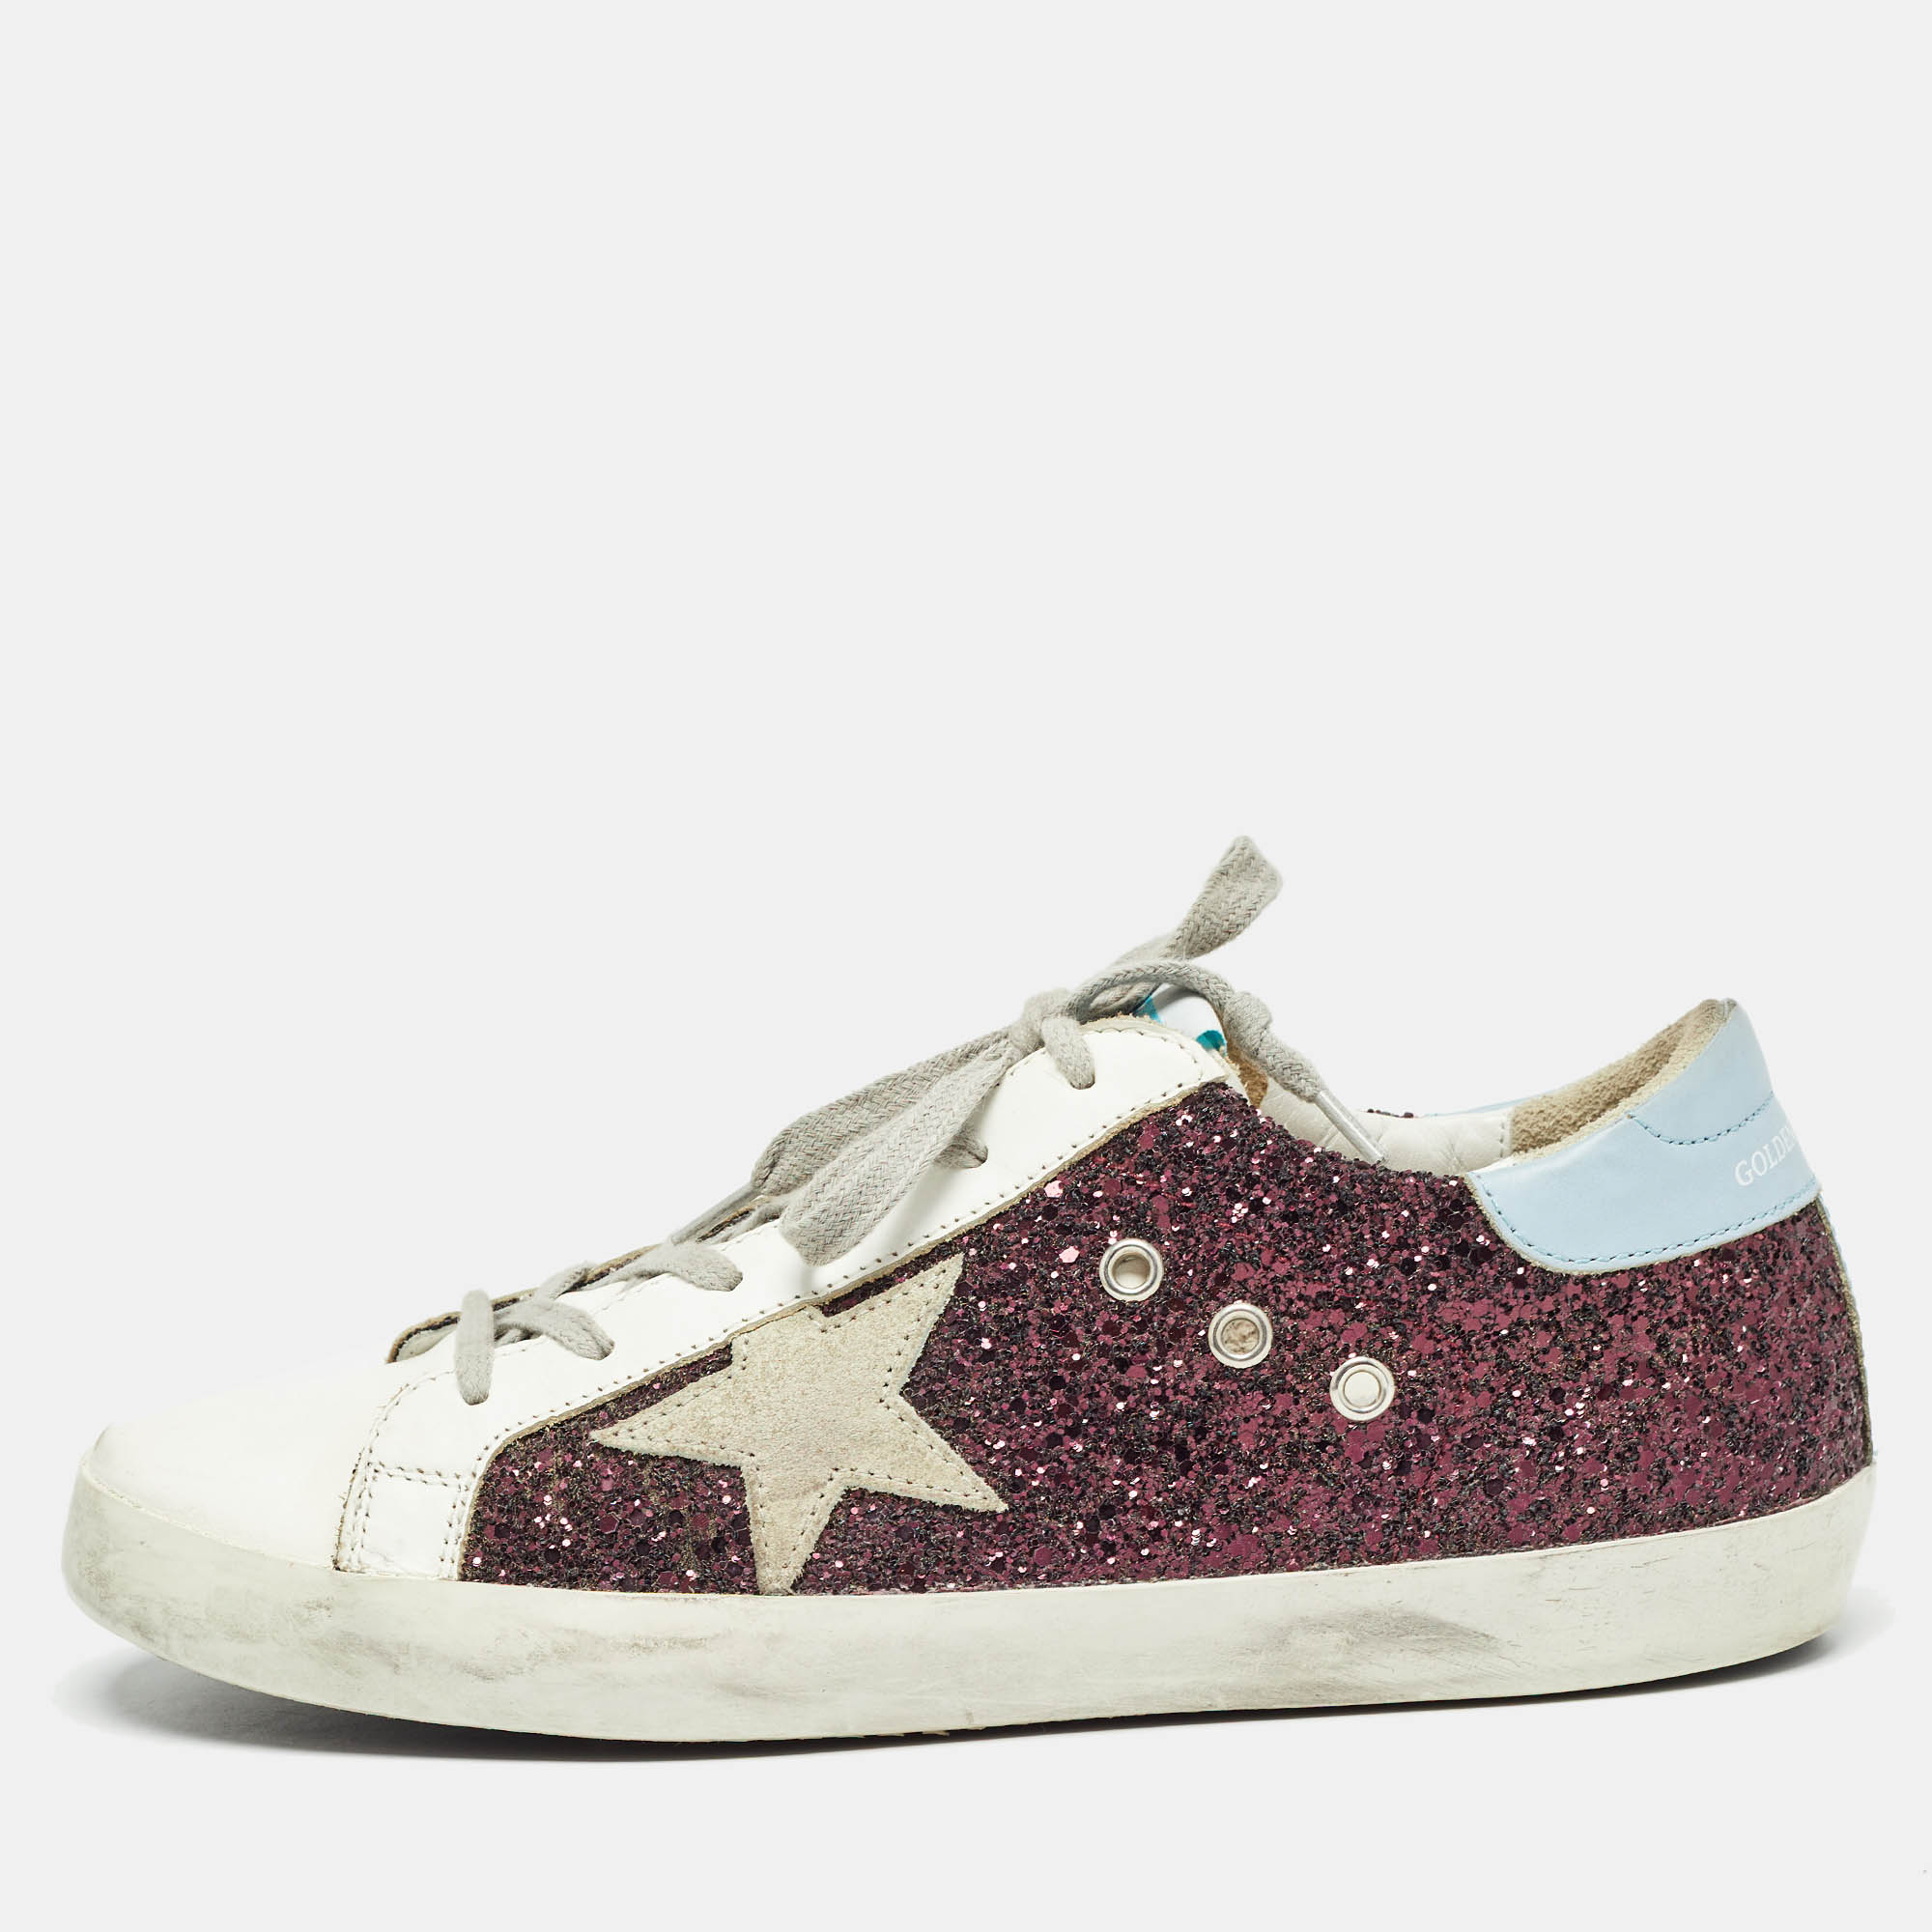 Golden goose multicolor glitter and leather superstar sneakers size 41